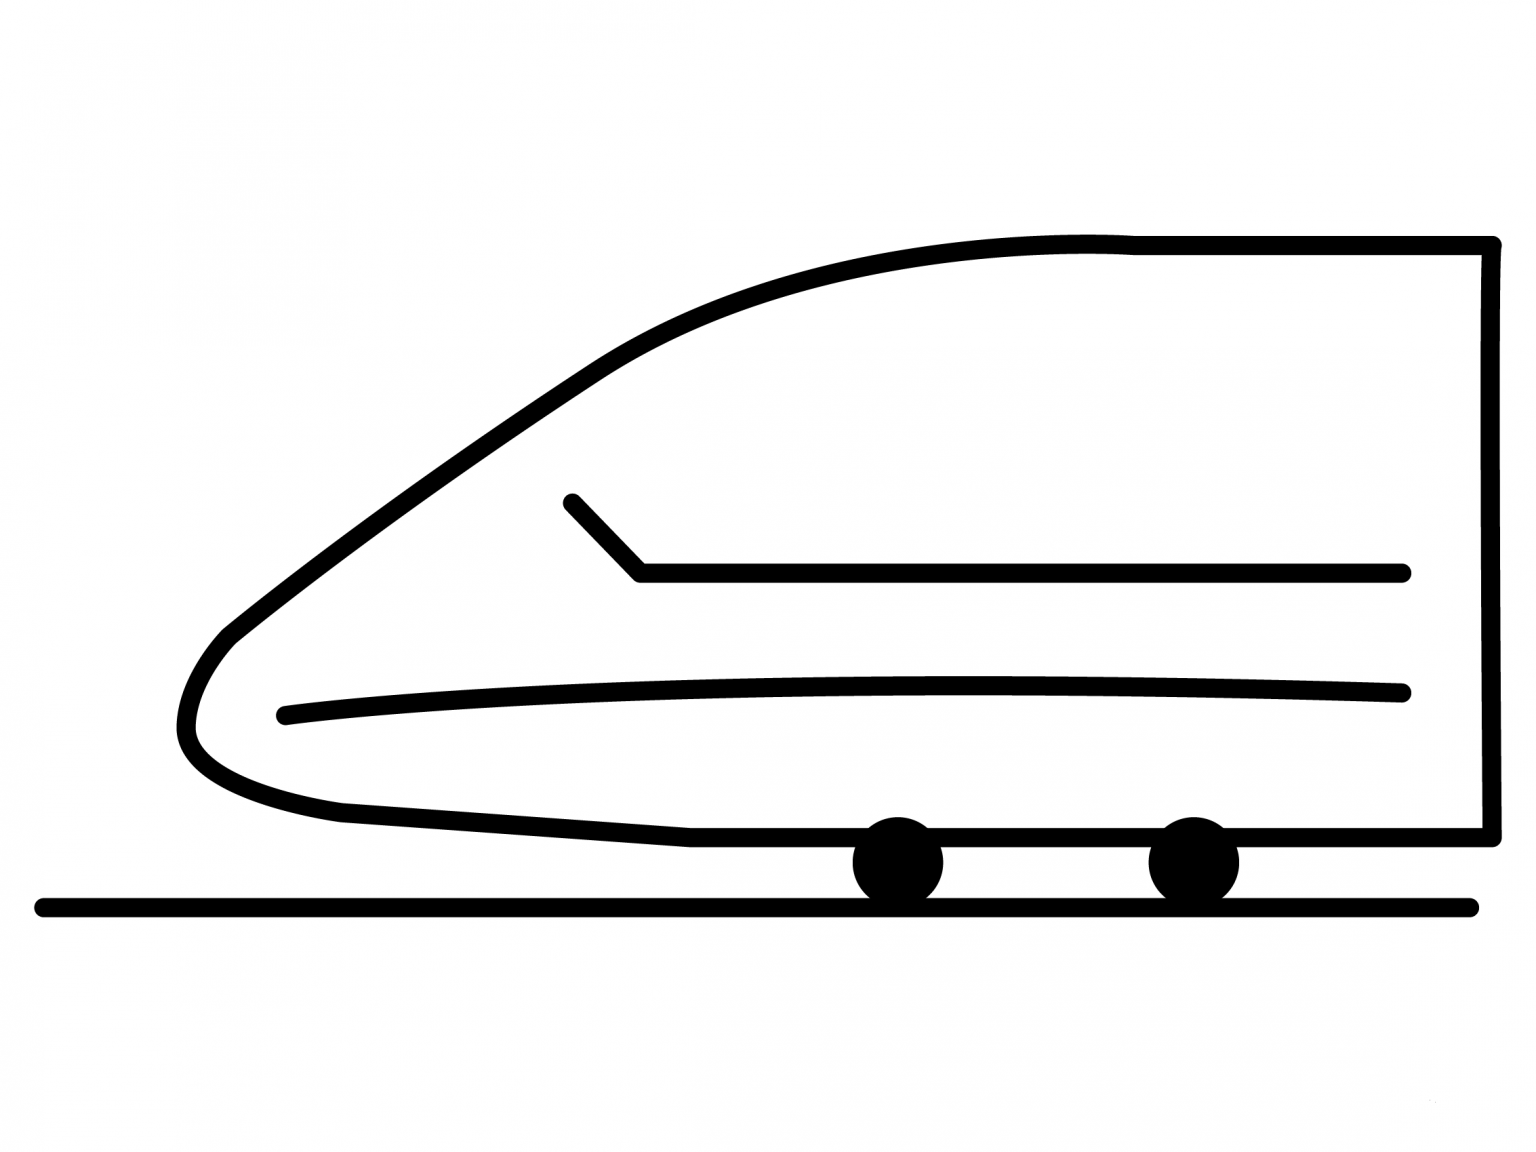 Bullet Train Emoji coloring page ColouringPages